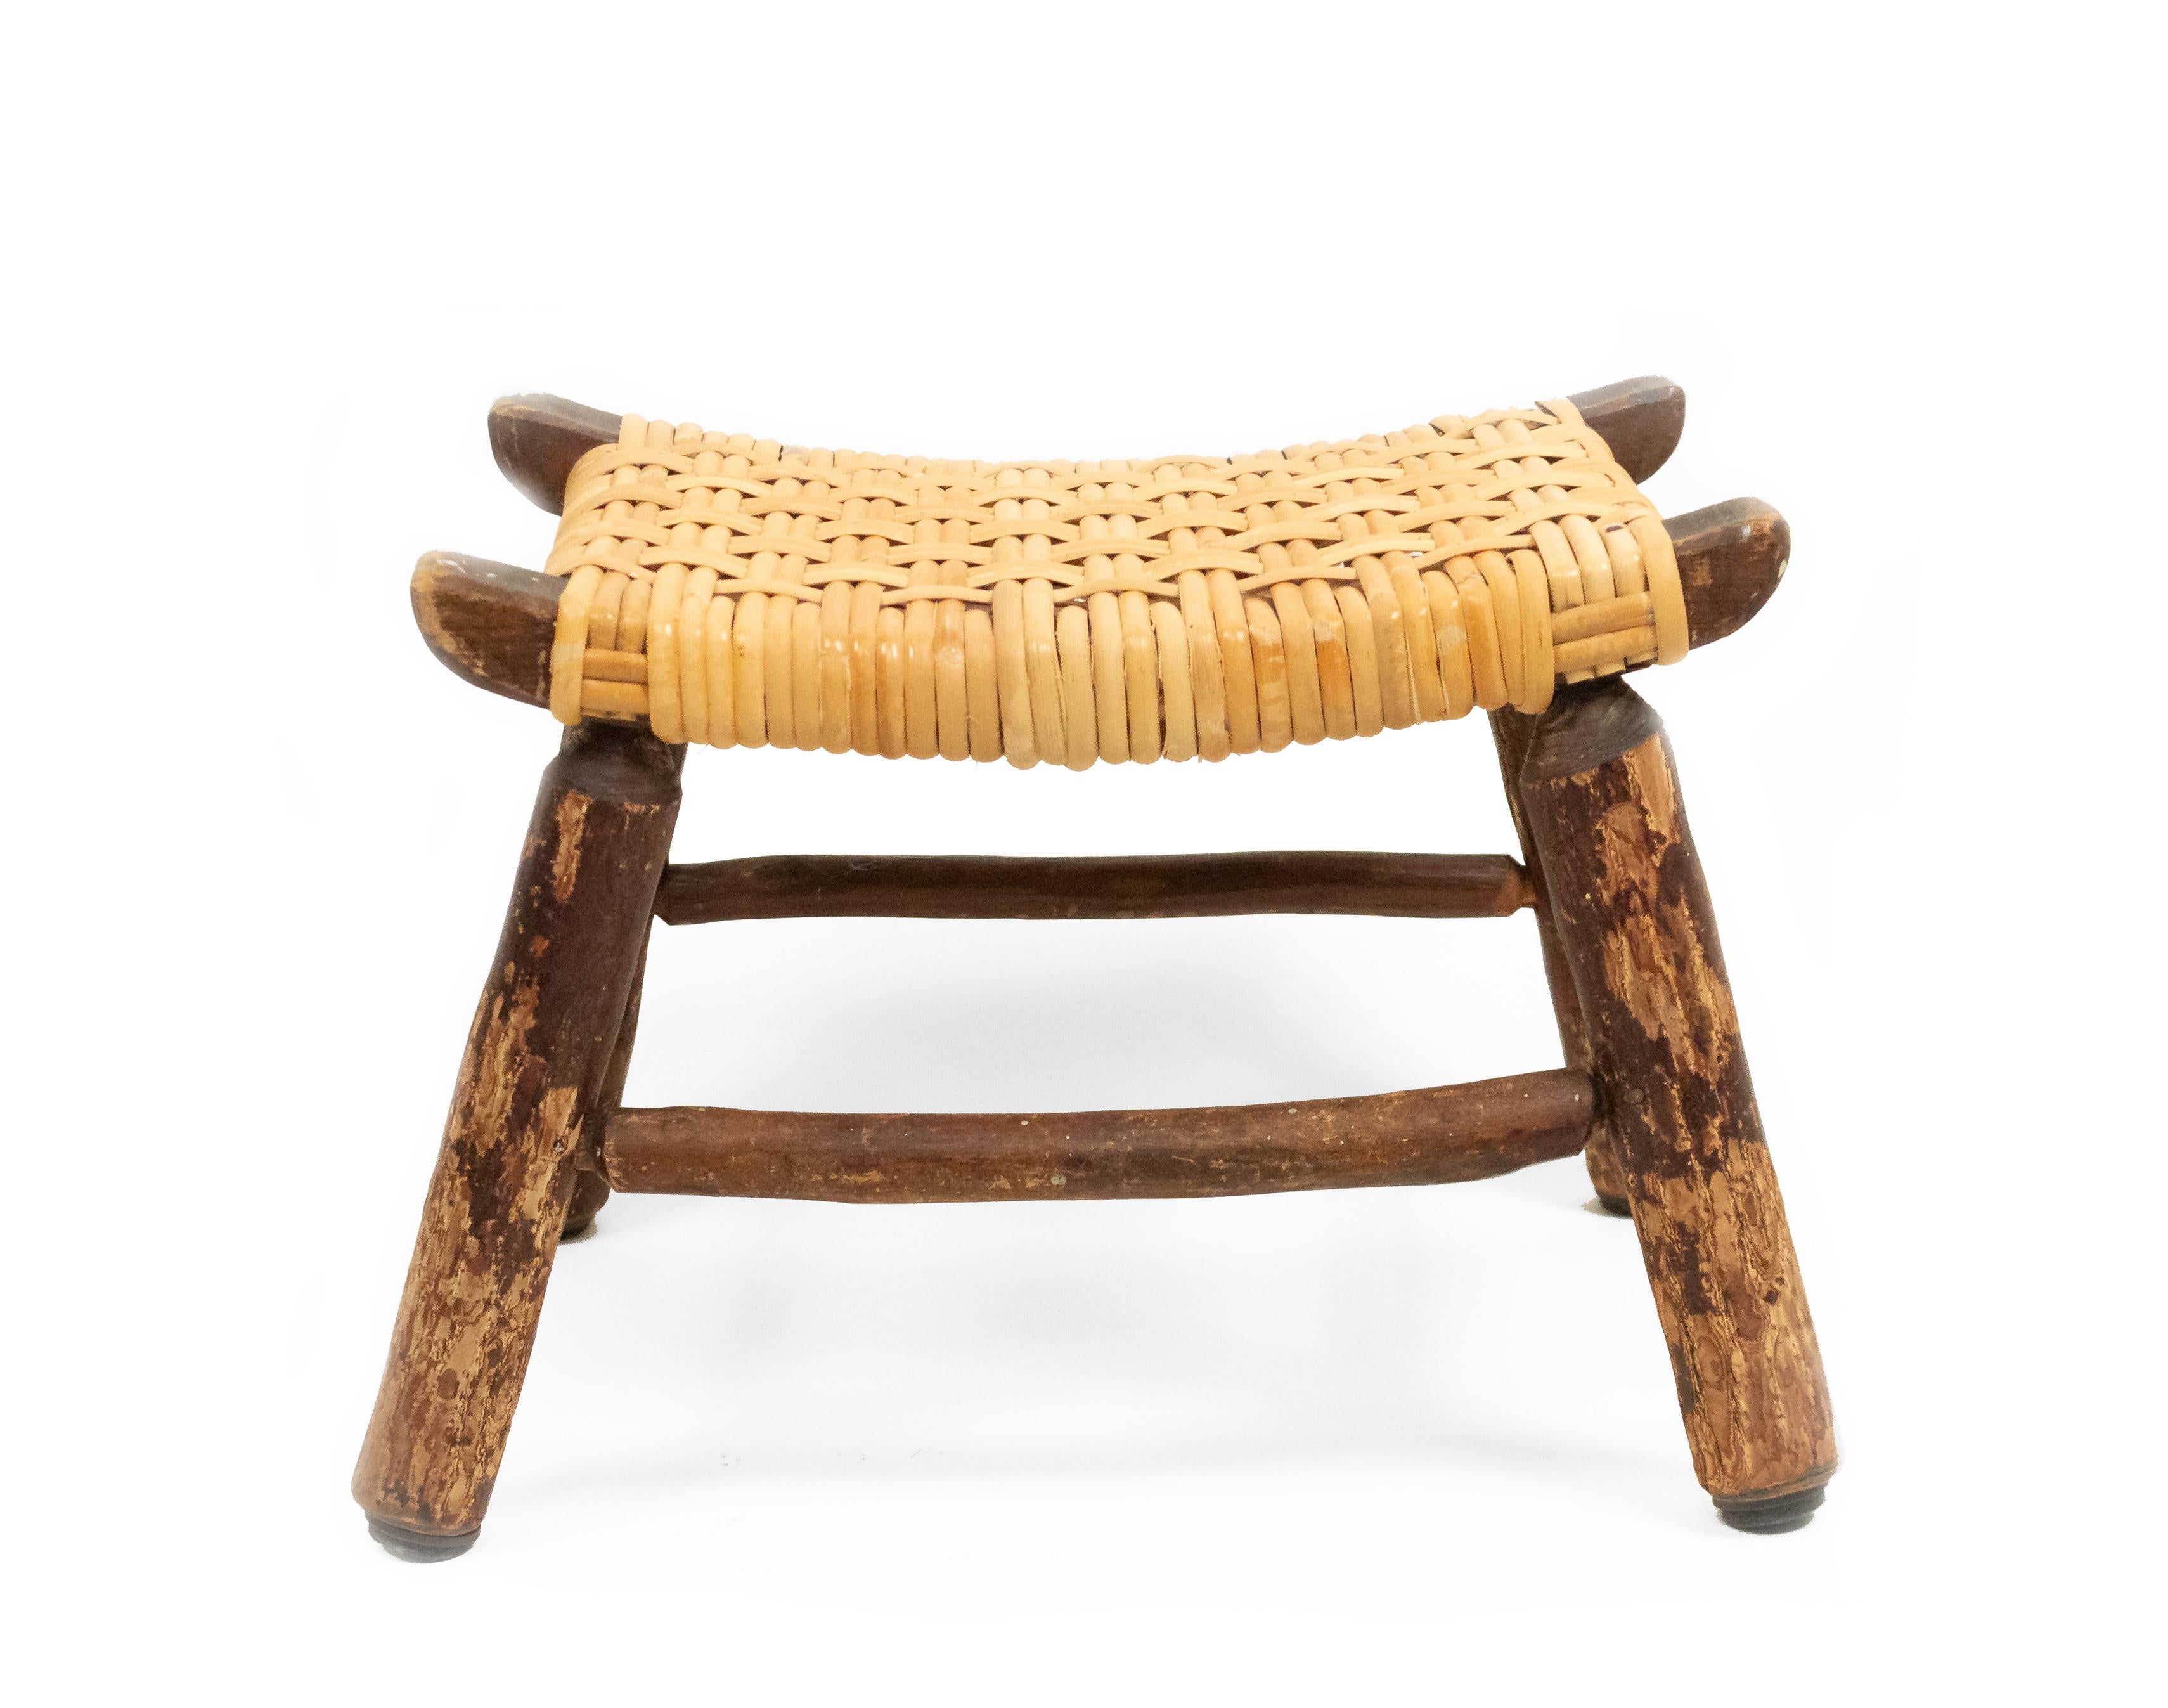 Rustic Old Hickory style footstool with woven cane seat.
  